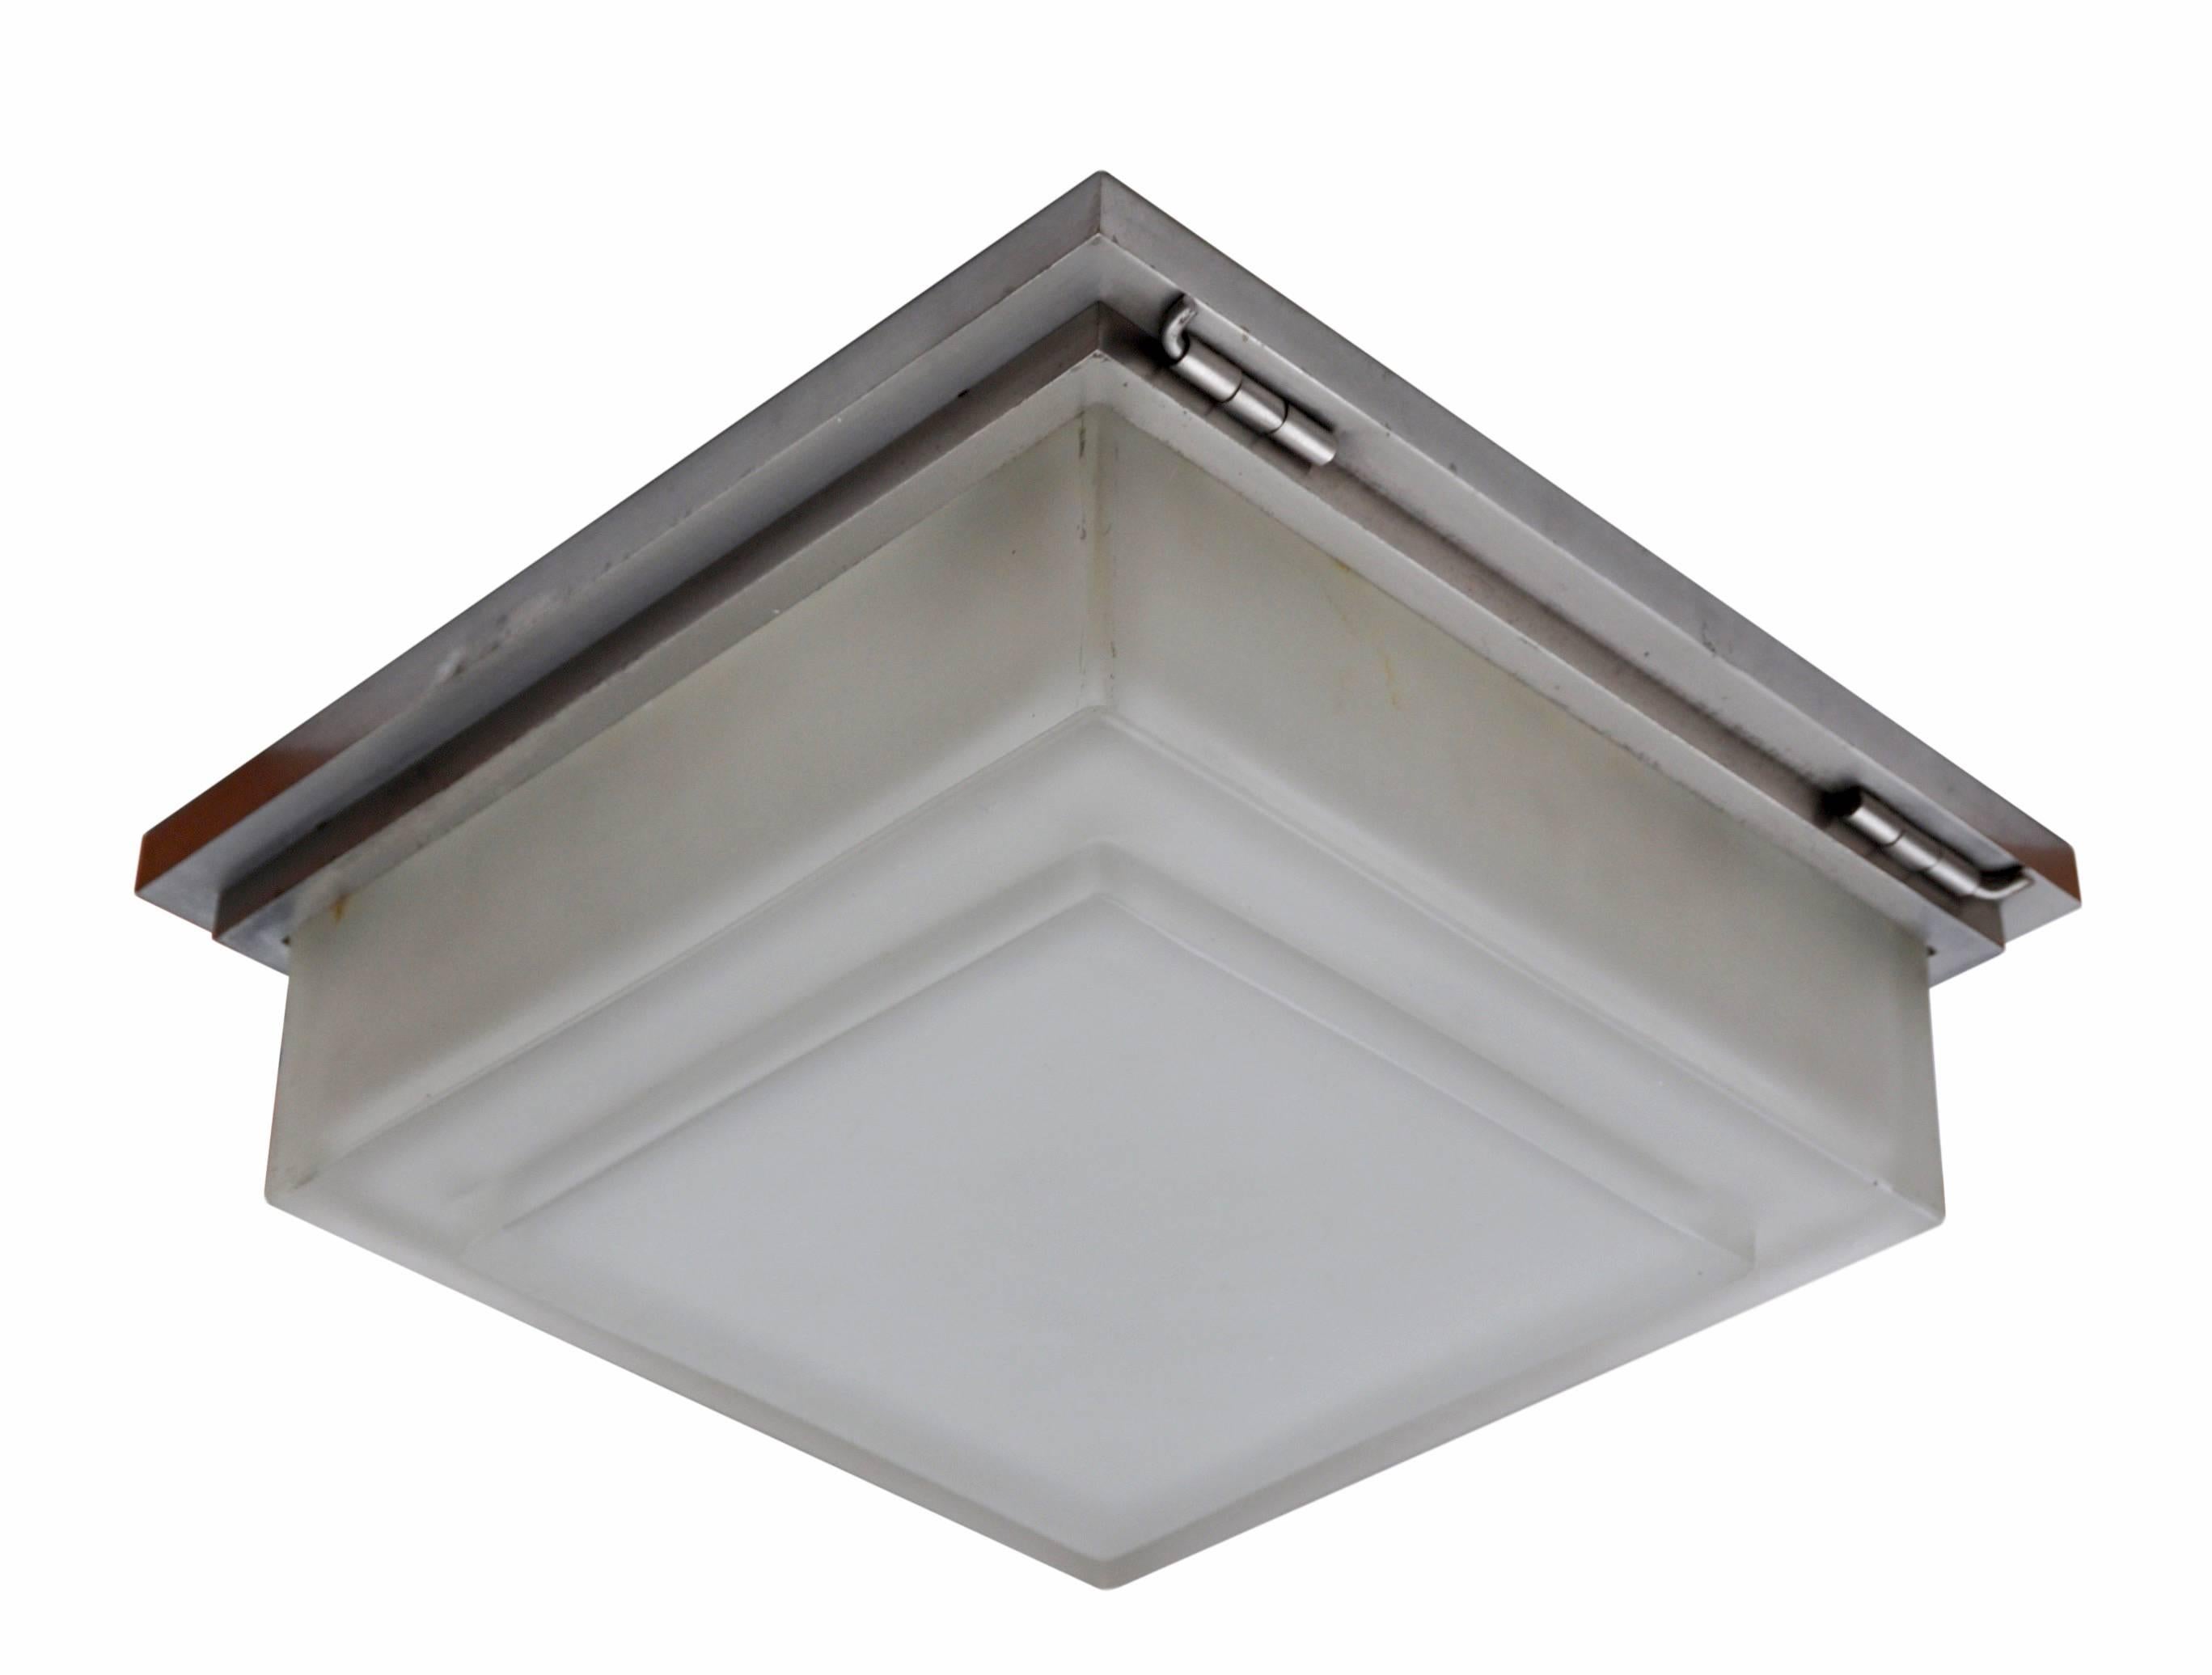 Modernist flush mount with thick acid etched glass sitting within an equally robust nickeled brass frame. There are four high quality brass sockets within fitting E26 light bulbs. The choice of materials marries masterfully to the strict layered